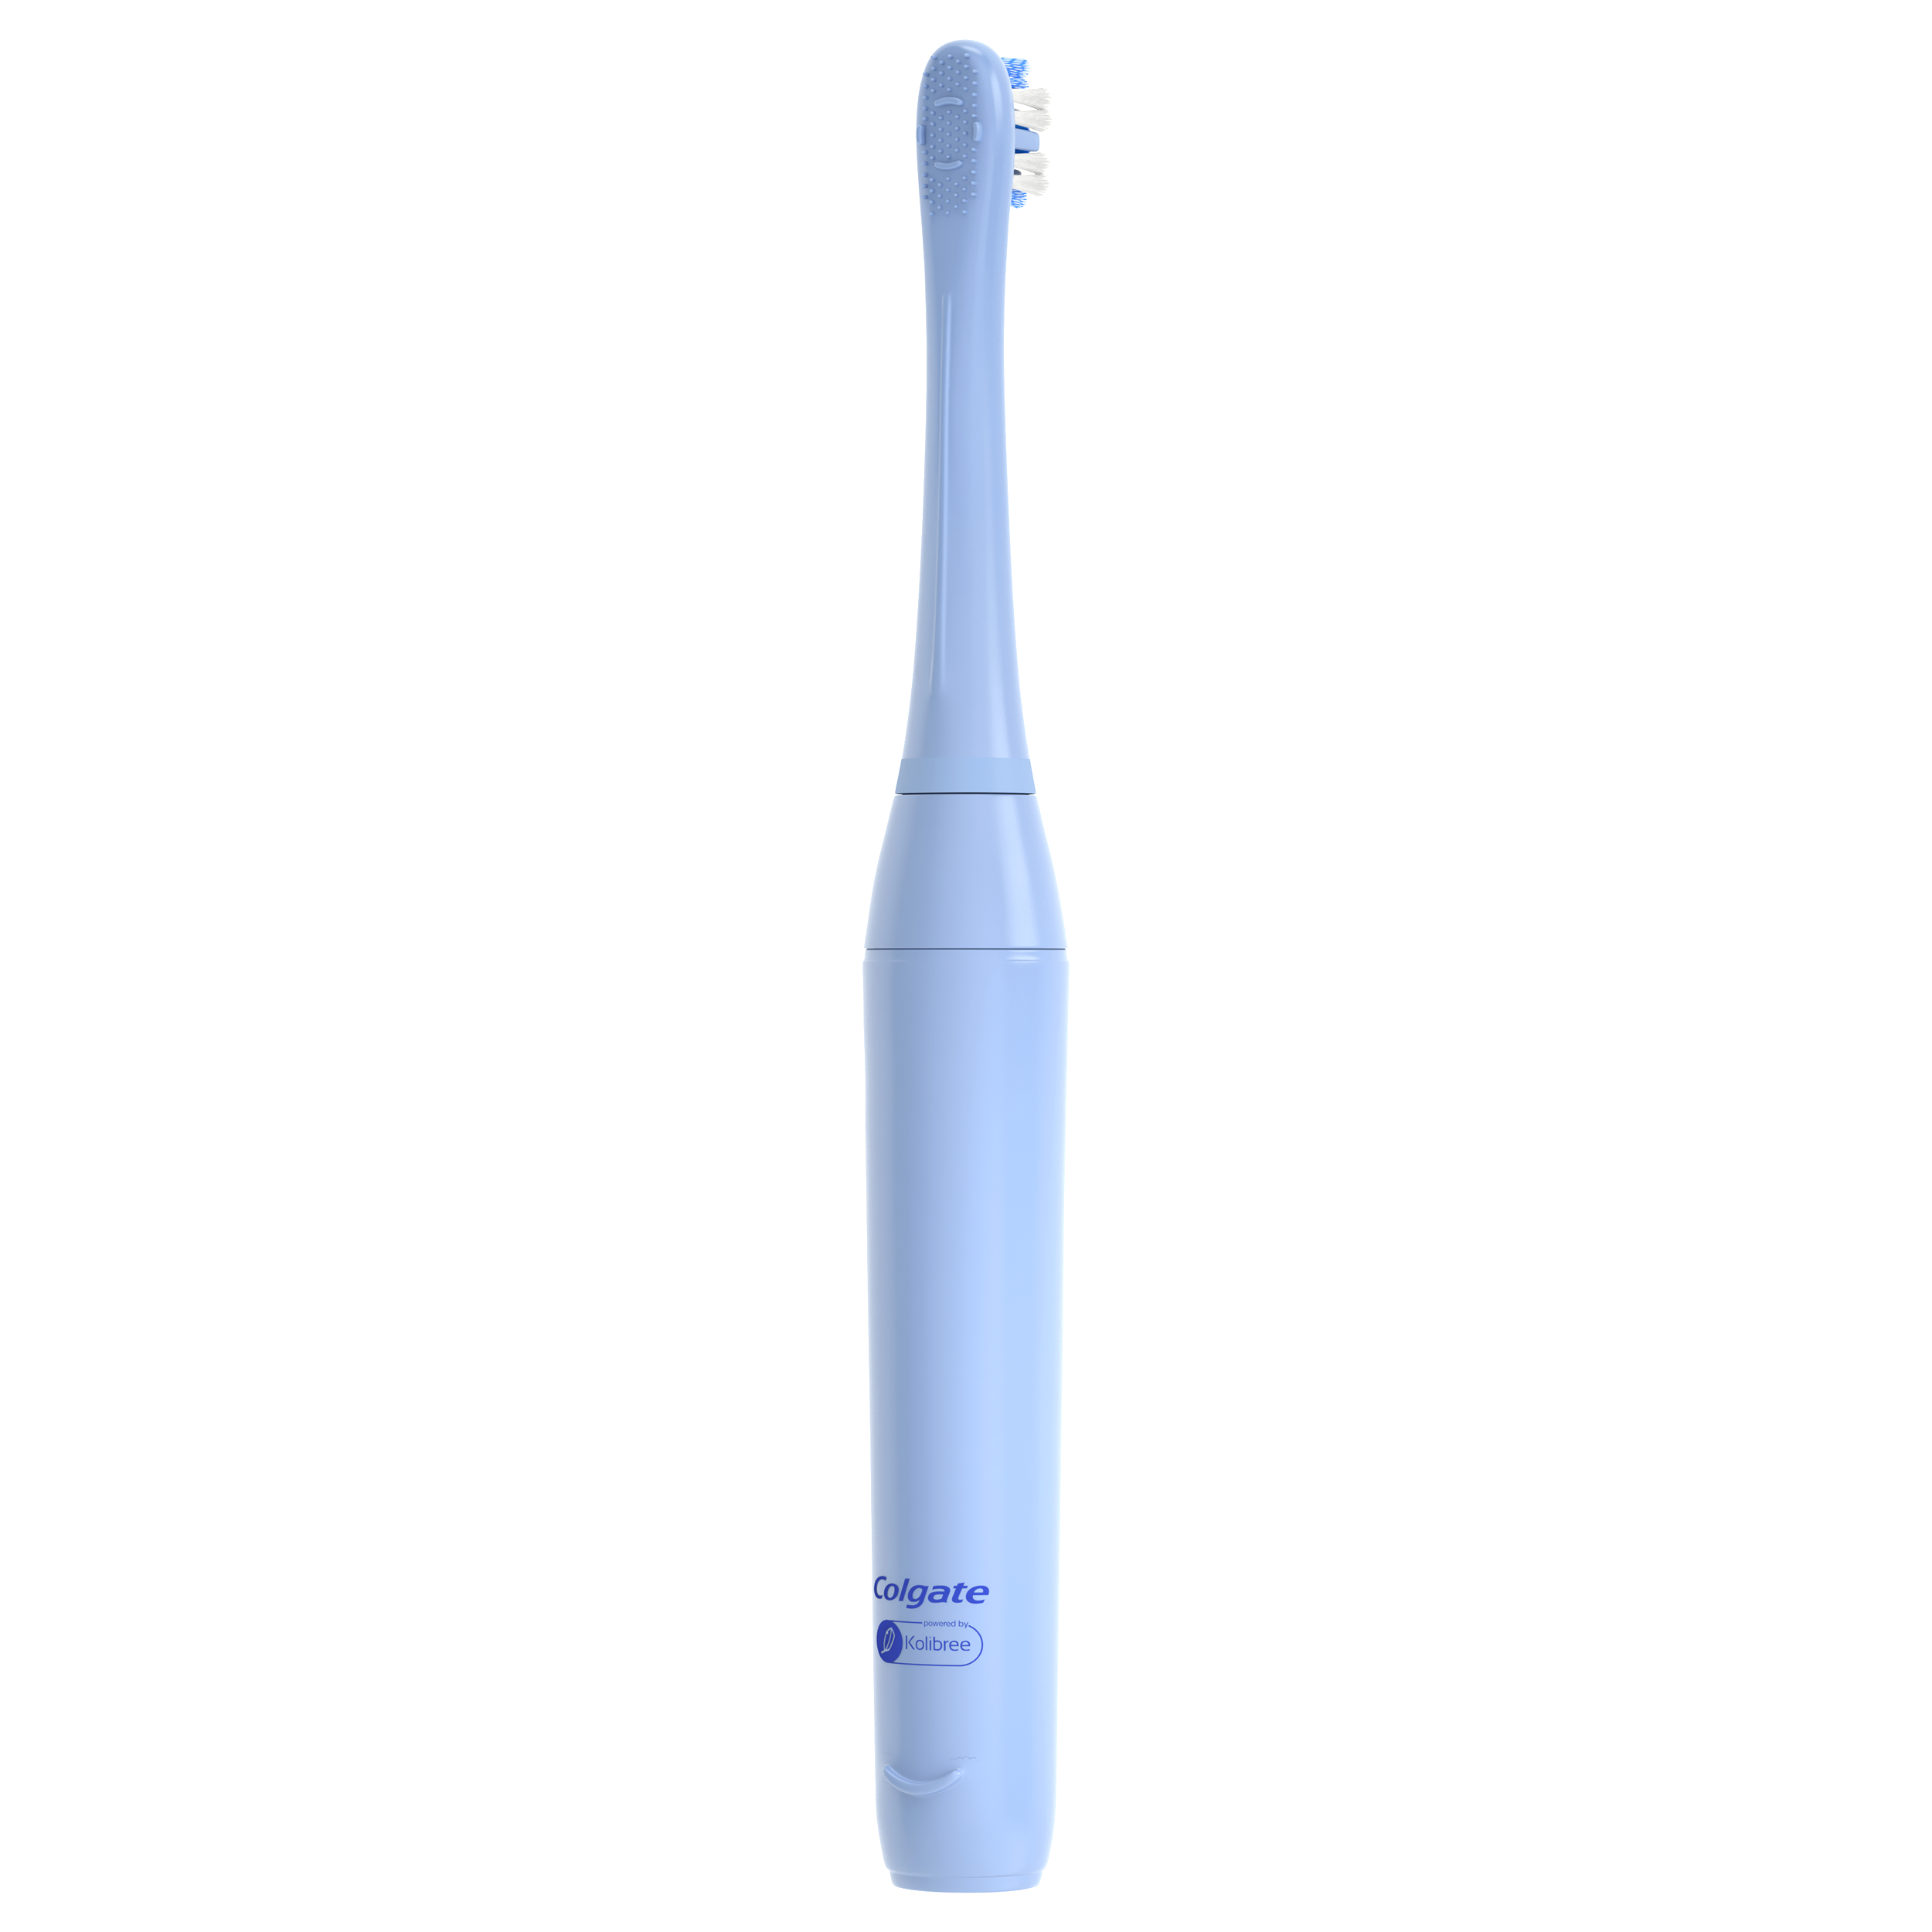 hum by Colgate Smart Rechargeable Electric Toothbrush Kit with Travel Case, Blue - image 4 of 13